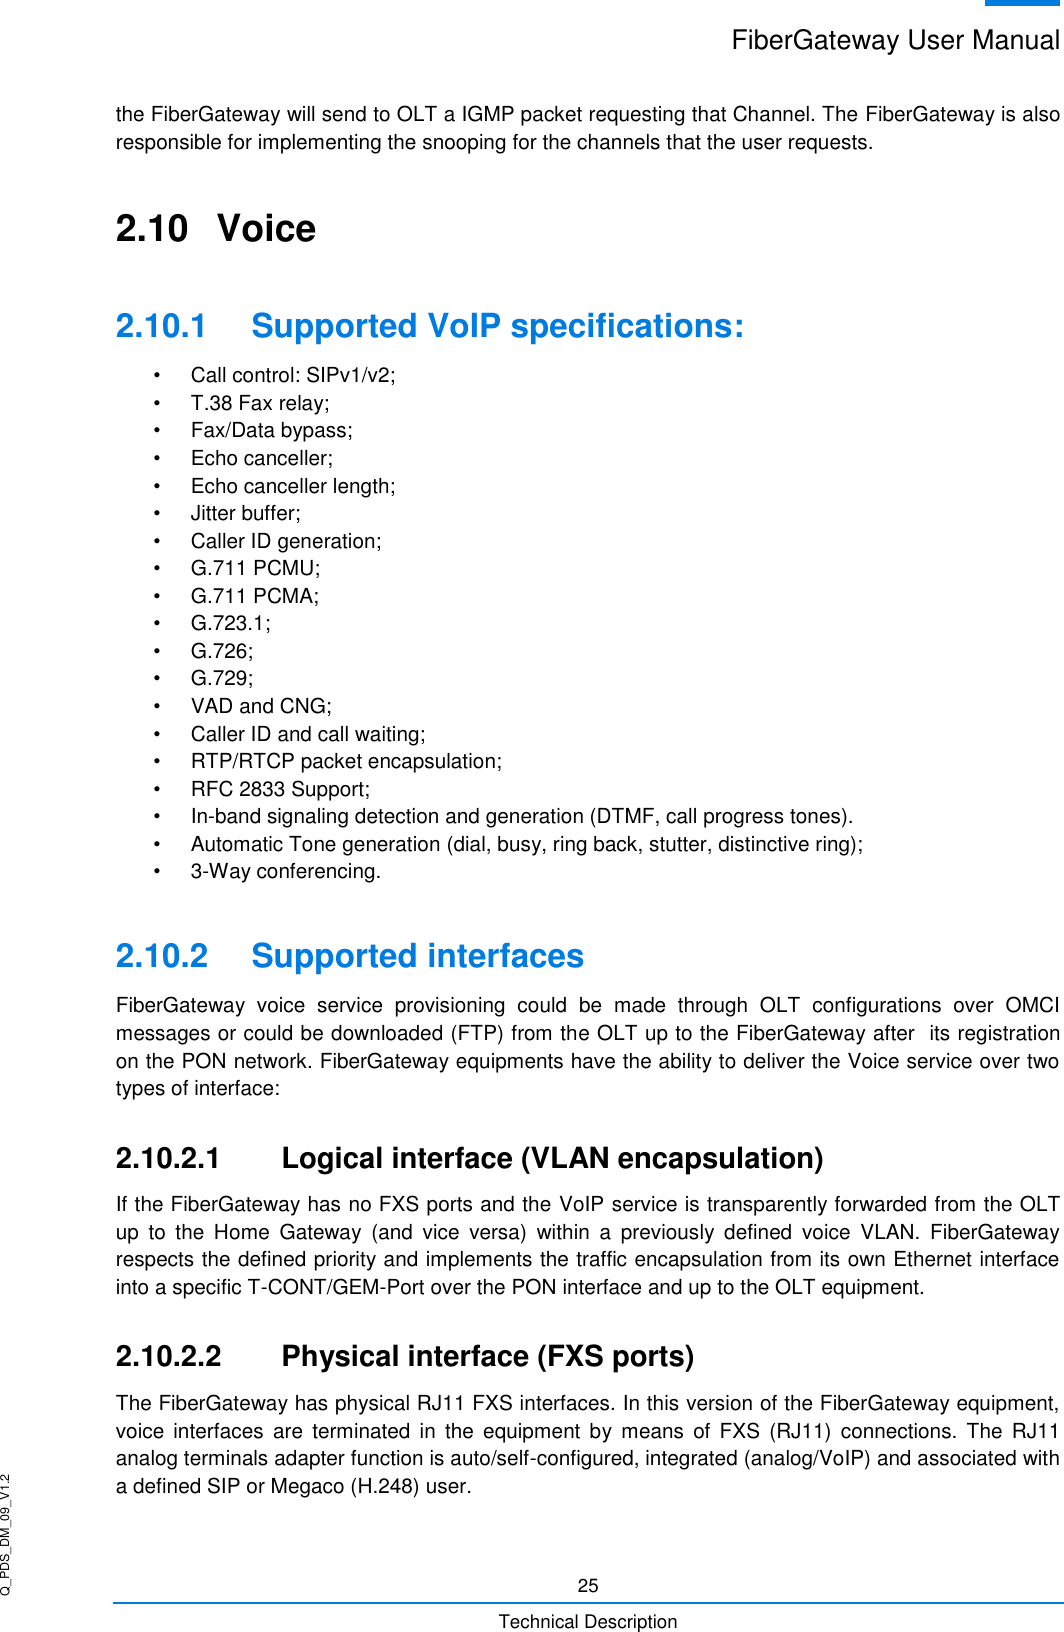 Q_PDS_DM_09_V1.2 FiberGateway User Manual  25 Technical Description the FiberGateway will send to OLT a IGMP packet requesting that Channel. The FiberGateway is also responsible for implementing the snooping for the channels that the user requests. 2.10  Voice 2.10.1  Supported VoIP specifications: •  Call control: SIPv1/v2;  •  T.38 Fax relay;  •  Fax/Data bypass; •  Echo canceller;  •  Echo canceller length;  •  Jitter buffer; •  Caller ID generation;  •  G.711 PCMU; •  G.711 PCMA;  •  G.723.1; •  G.726; •  G.729;  •  VAD and CNG; •  Caller ID and call waiting; •  RTP/RTCP packet encapsulation;  •  RFC 2833 Support; • In-band signaling detection and generation (DTMF, call progress tones). •  Automatic Tone generation (dial, busy, ring back, stutter, distinctive ring);  •  3-Way conferencing. 2.10.2  Supported interfaces FiberGateway  voice  service  provisioning  could  be  made  through  OLT  configurations  over  OMCI messages or could be downloaded (FTP) from the OLT up to the FiberGateway after  its registration on the PON network. FiberGateway equipments have the ability to deliver the Voice service over two types of interface: 2.10.2.1  Logical interface (VLAN encapsulation) If the FiberGateway has no FXS ports and the VoIP service is transparently forwarded from the OLT up  to  the  Home  Gateway  (and  vice  versa)  within  a  previously  defined  voice  VLAN.  FiberGateway respects the defined priority and implements the traffic encapsulation from its own Ethernet interface into a specific T-CONT/GEM-Port over the PON interface and up to the OLT equipment. 2.10.2.2  Physical interface (FXS ports) The FiberGateway has physical RJ11 FXS interfaces. In this version of the FiberGateway equipment, voice  interfaces  are  terminated  in  the  equipment  by  means  of  FXS  (RJ11)  connections.  The  RJ11 analog terminals adapter function is auto/self-configured, integrated (analog/VoIP) and associated with a defined SIP or Megaco (H.248) user. 